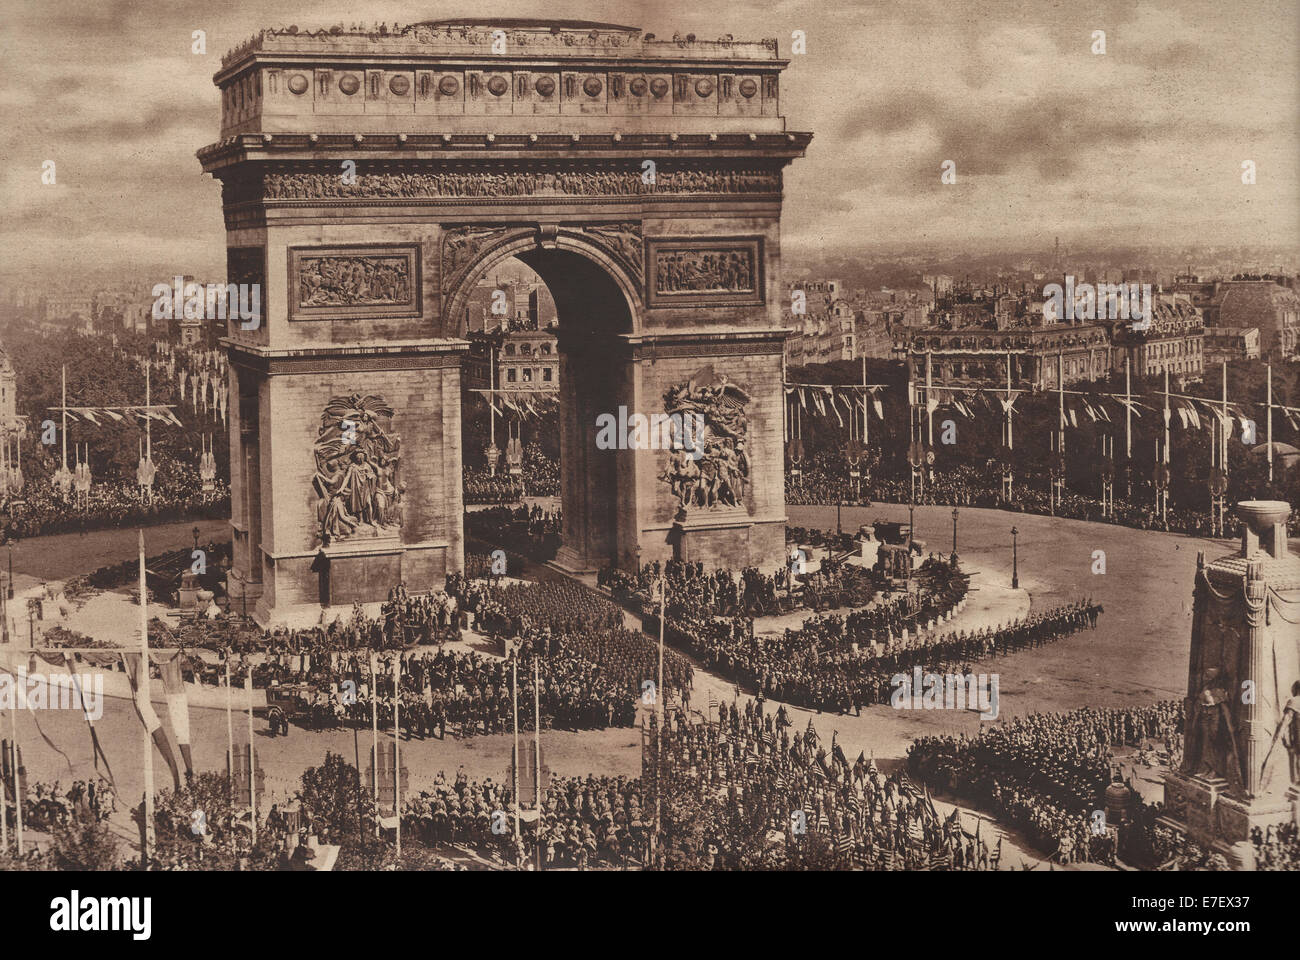 Magnificent Victory Parade passing through the Arc de Triomphe, Paris, July 14, 1919 - Conquerers in the Great War Marching on Bastile Day through the Triumphal Arch in Paris, under which only victors can pass.  Millions witnessed the wonderful parade led by Joffre, Foch, Pershing and other notable figures of the war Stock Photo